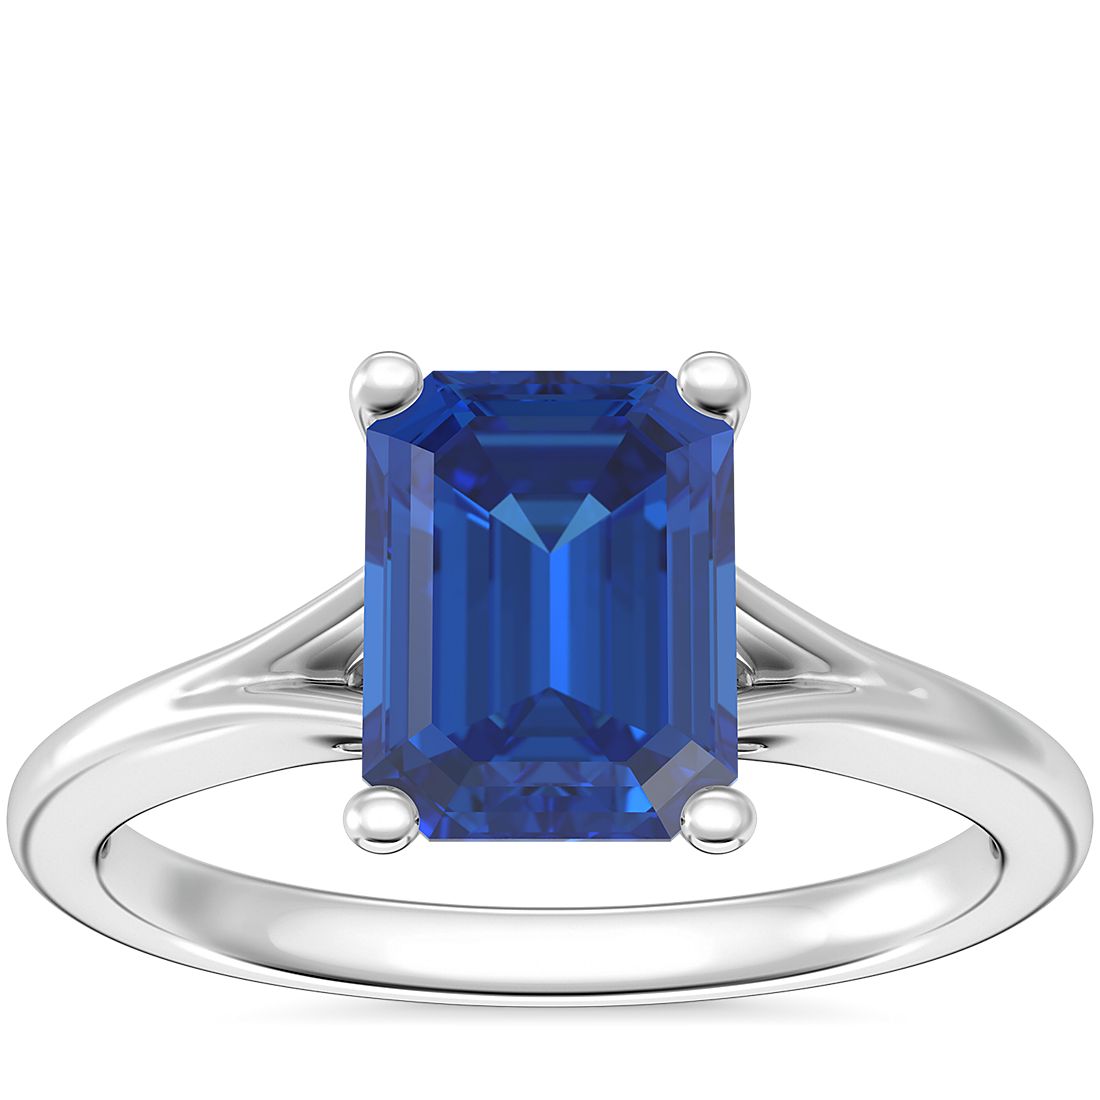 Petite Split Shank Solitaire Engagement Ring with Emerald-Cut Sapphire in 14k White Gold (8x6mm)